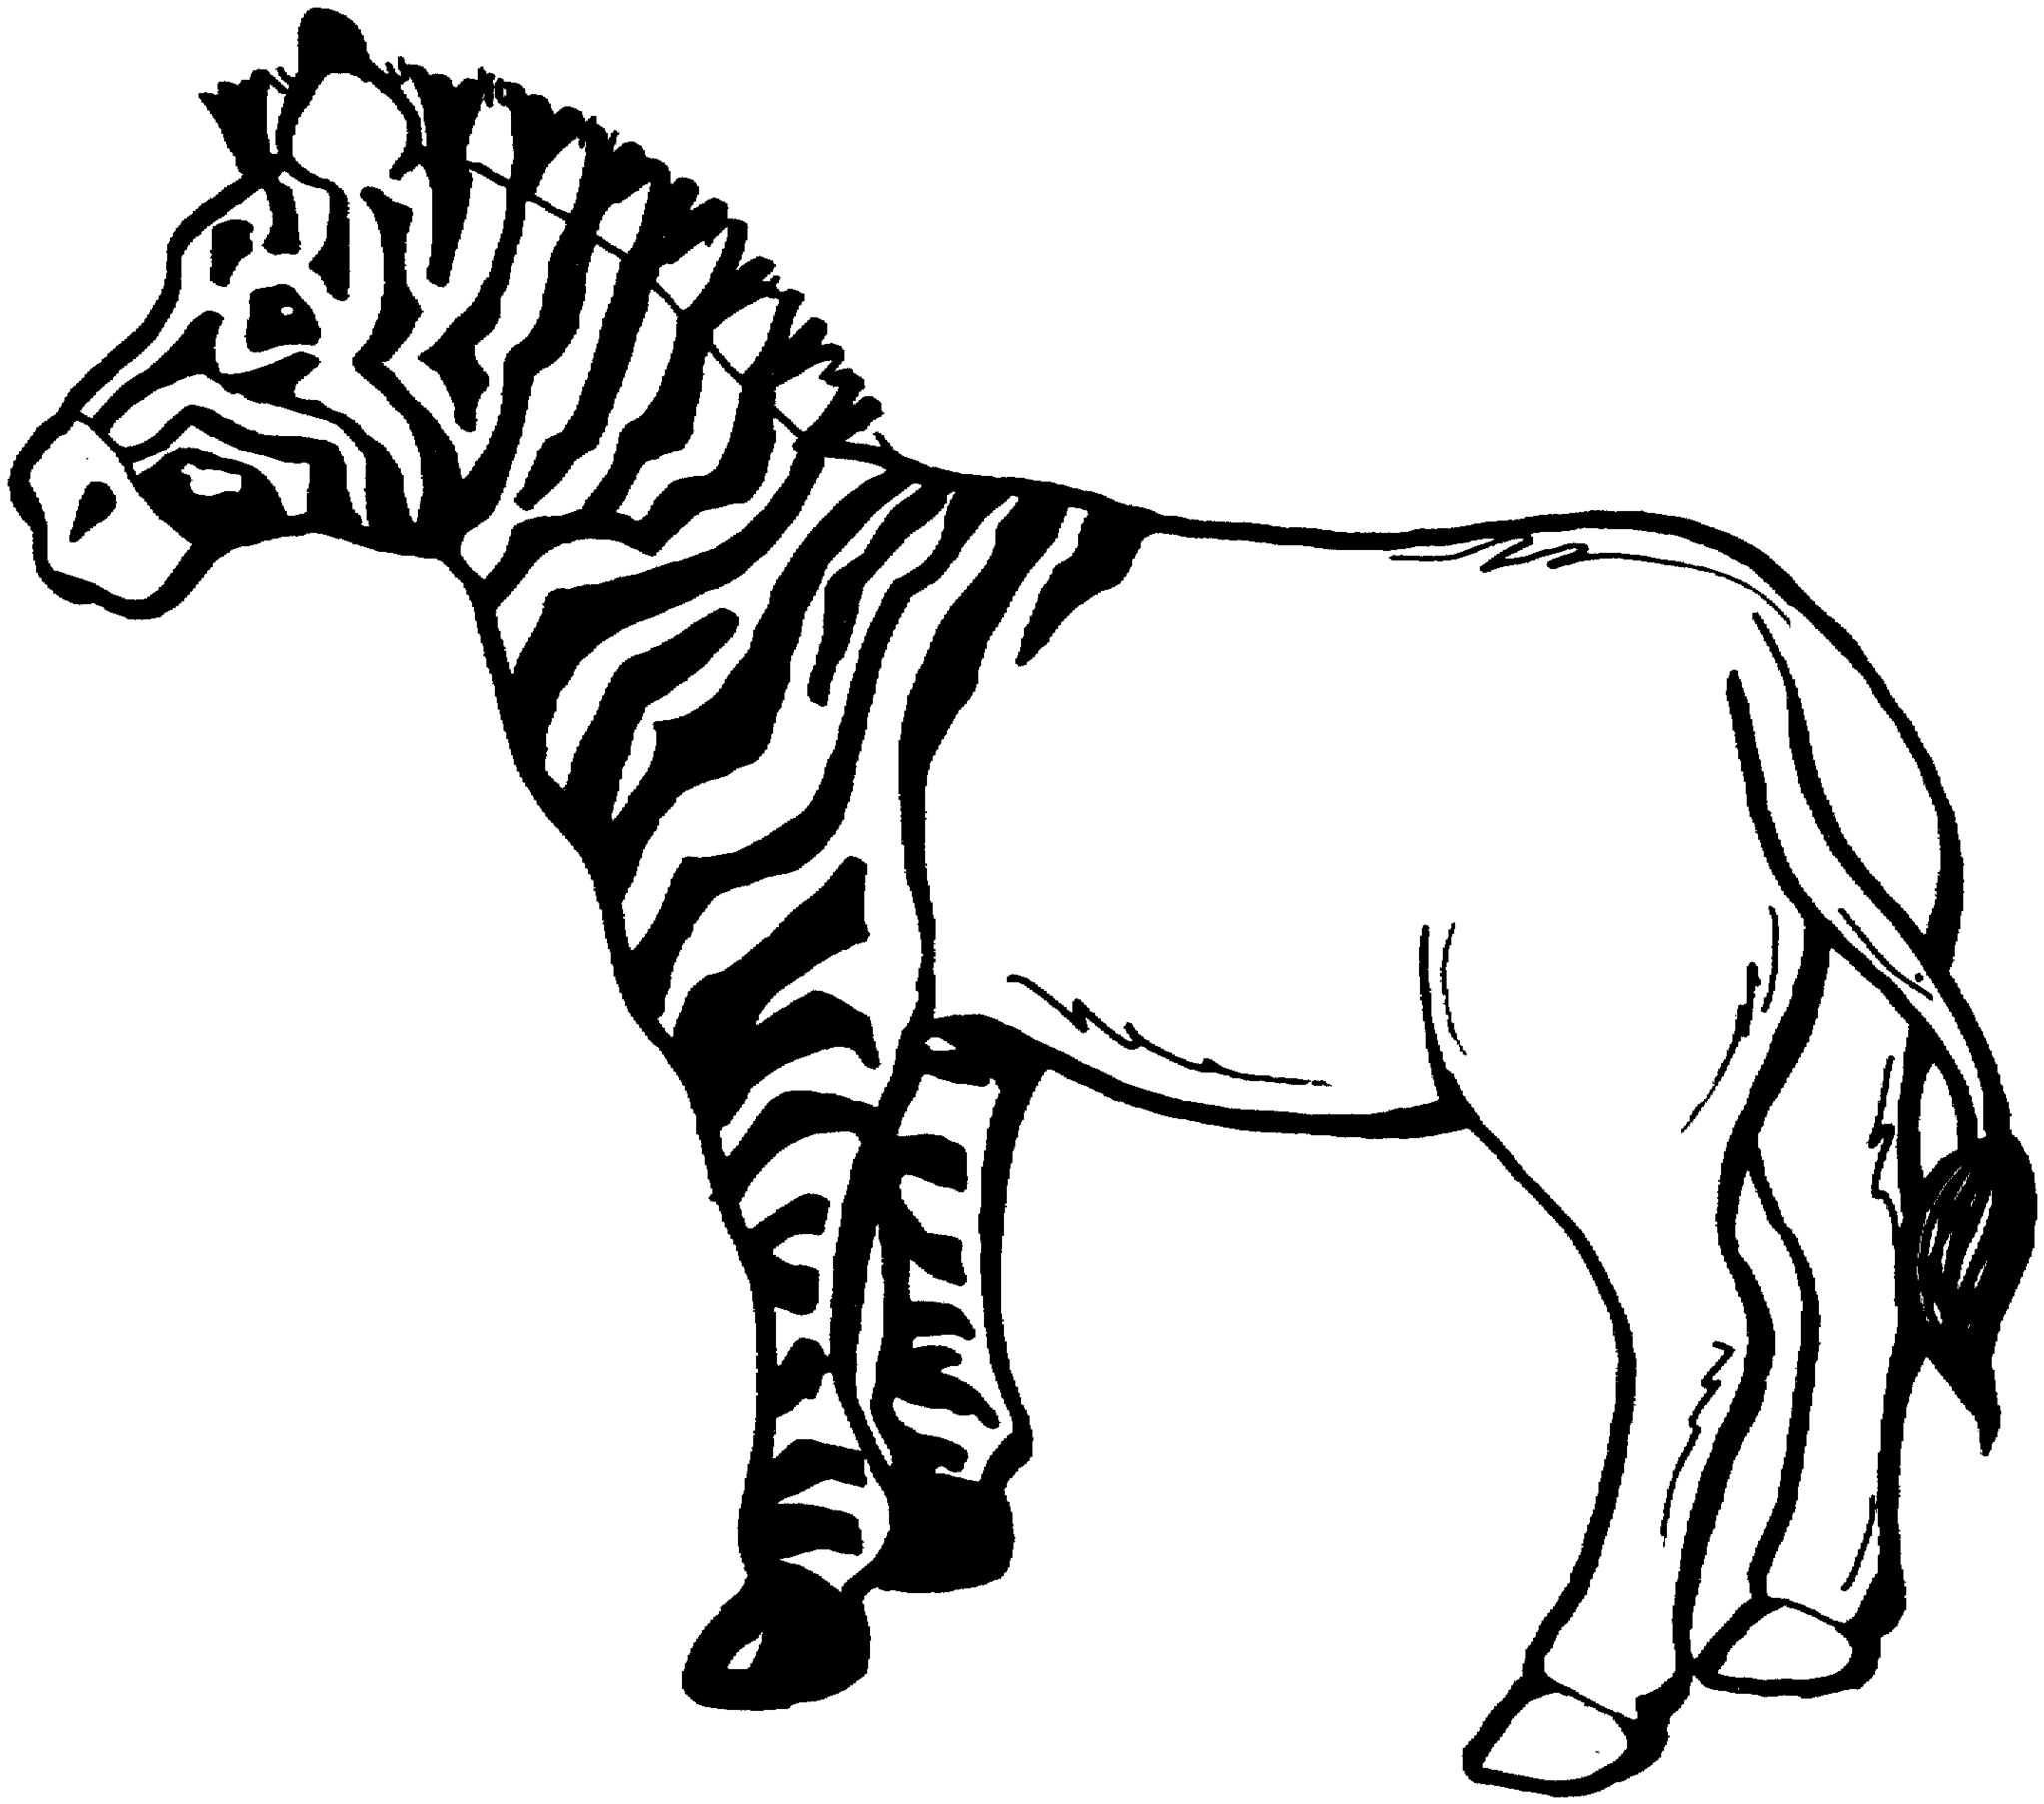 zebra clipart black and white drawing